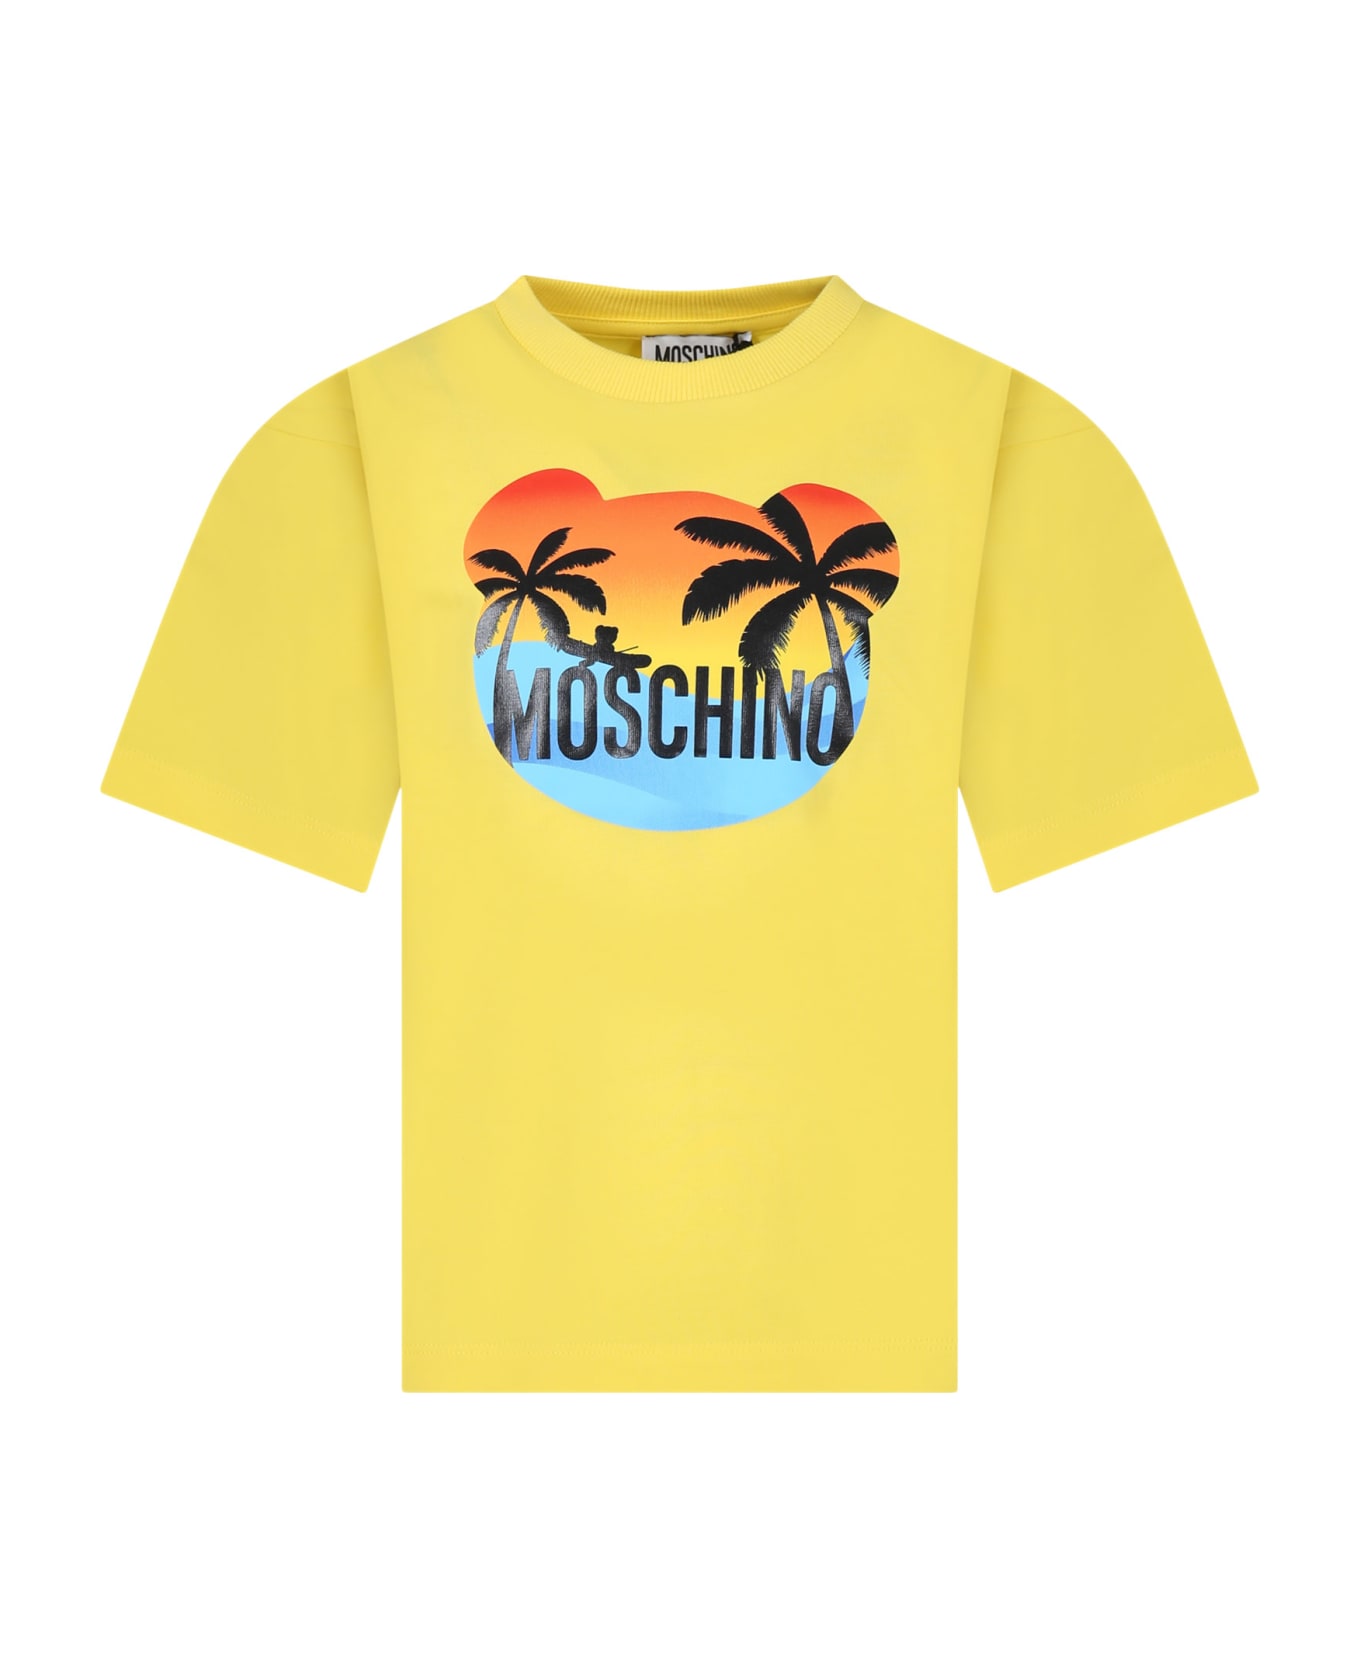 Moschino Yellow T-shirt For Kids With Multicolor Print And Logo - Yellow